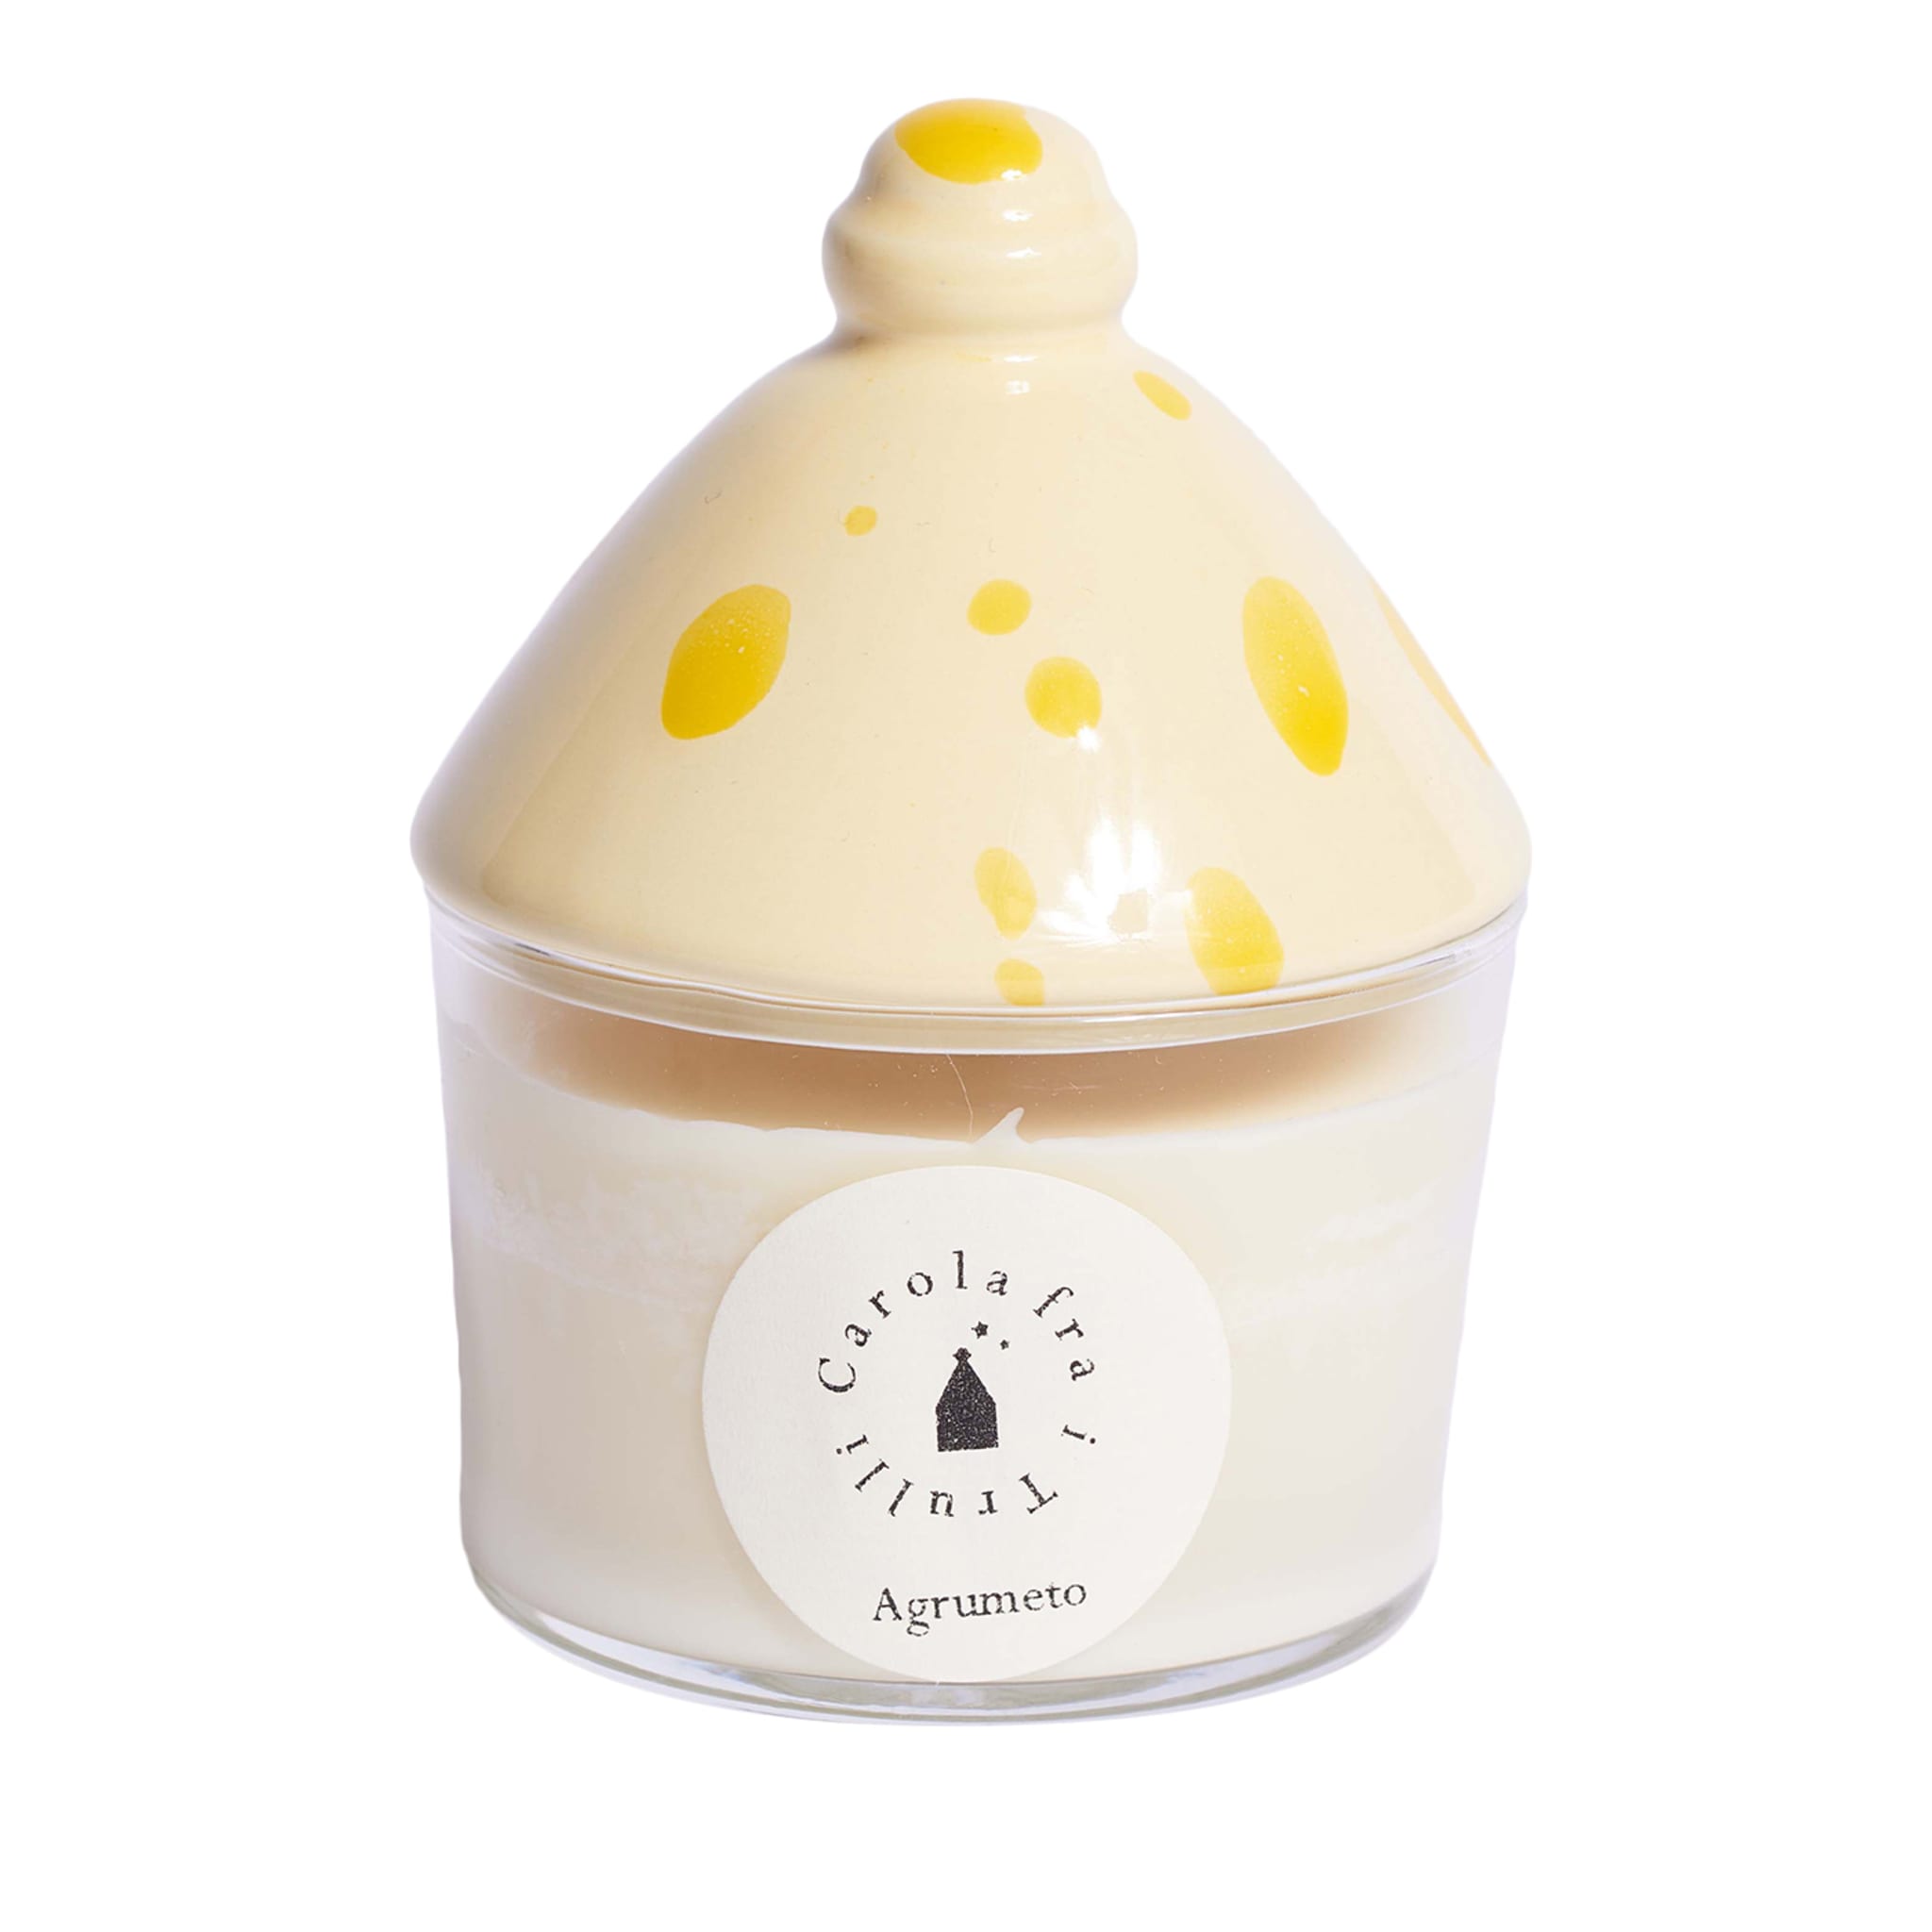 Agrumeto Scented Candle with Ceramic Lid - Main view